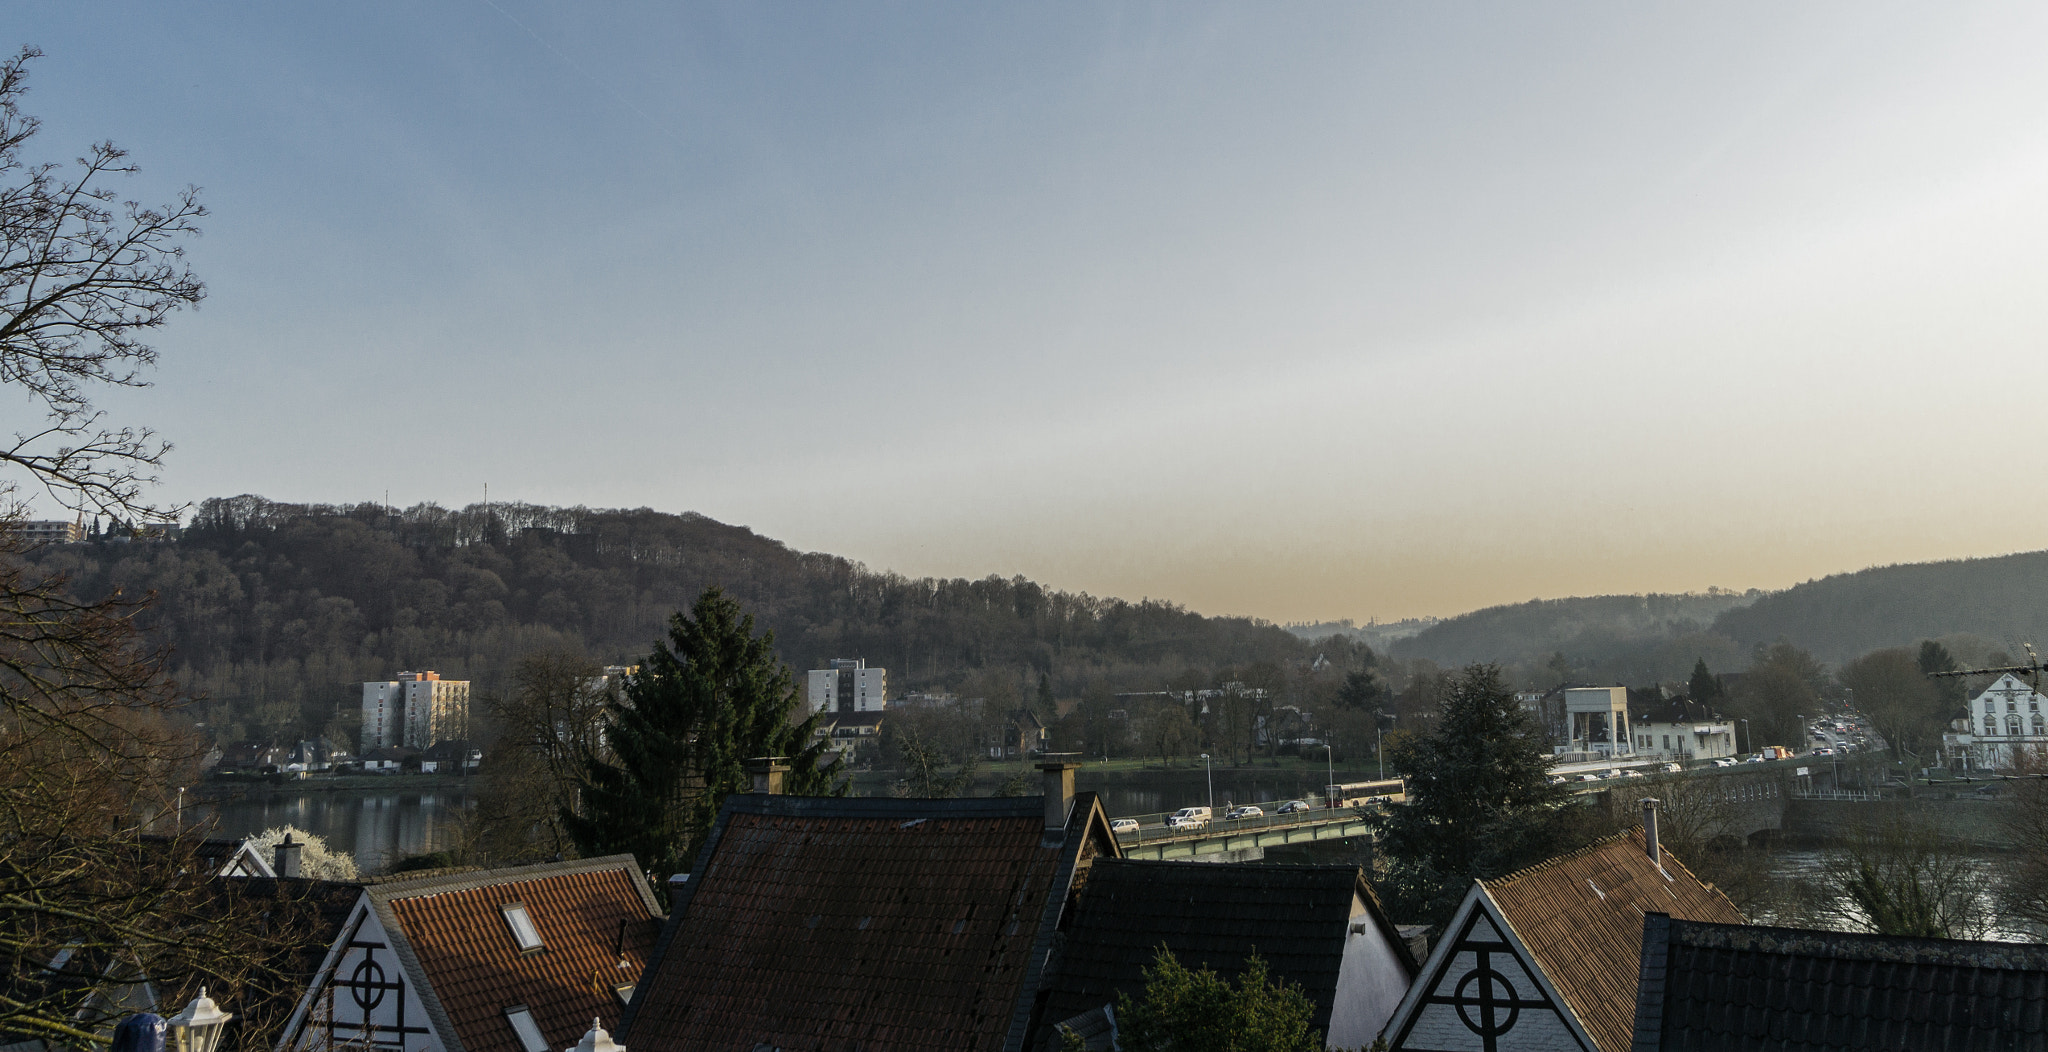 Sony a6000 sample photo. View from the old town of essen-kettwig photography